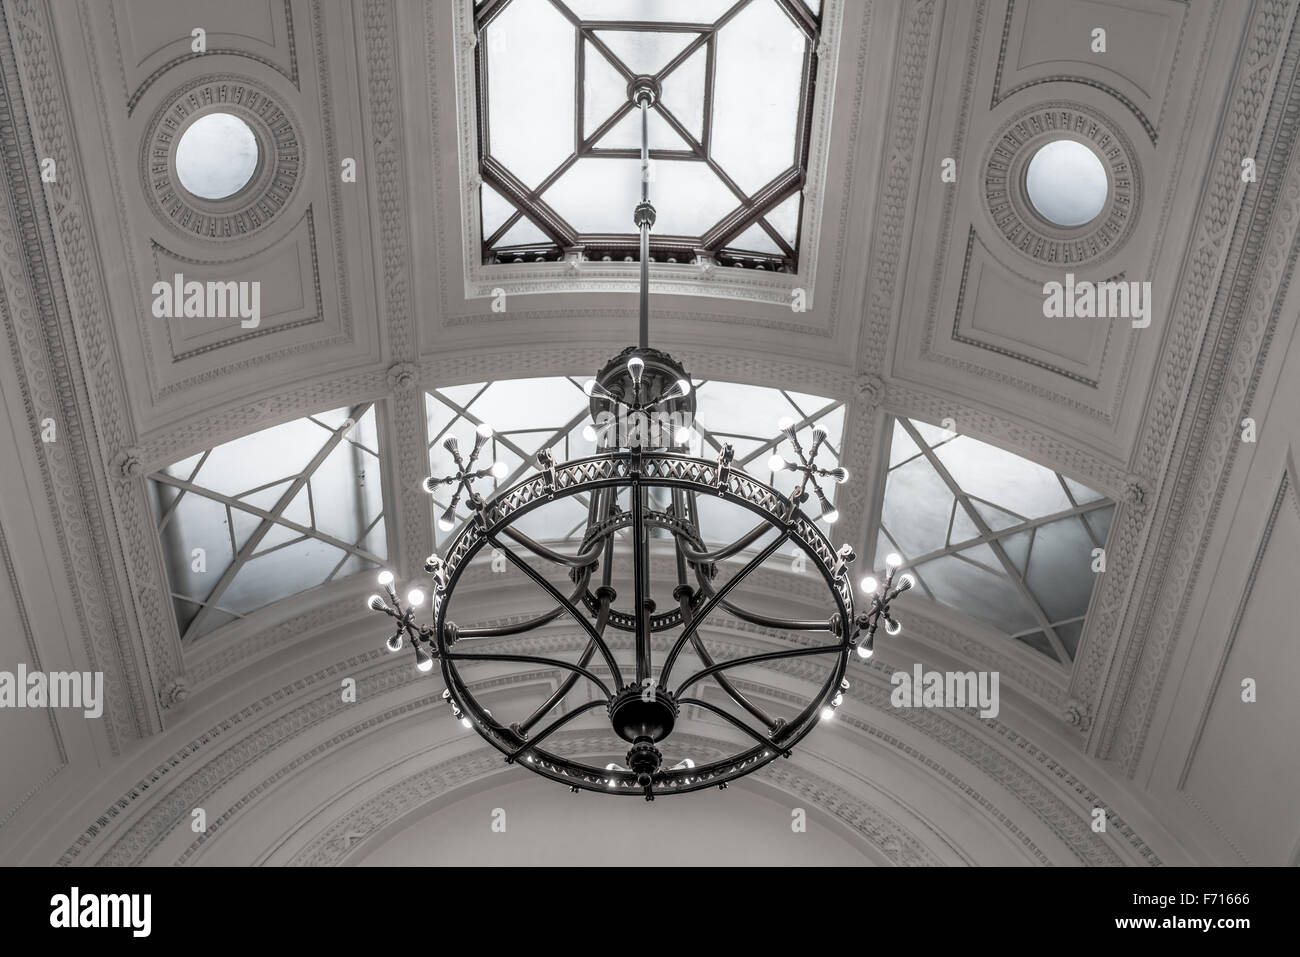 Ornate neoclassical Ceiling with hanging iron chandelier, Stock Photo